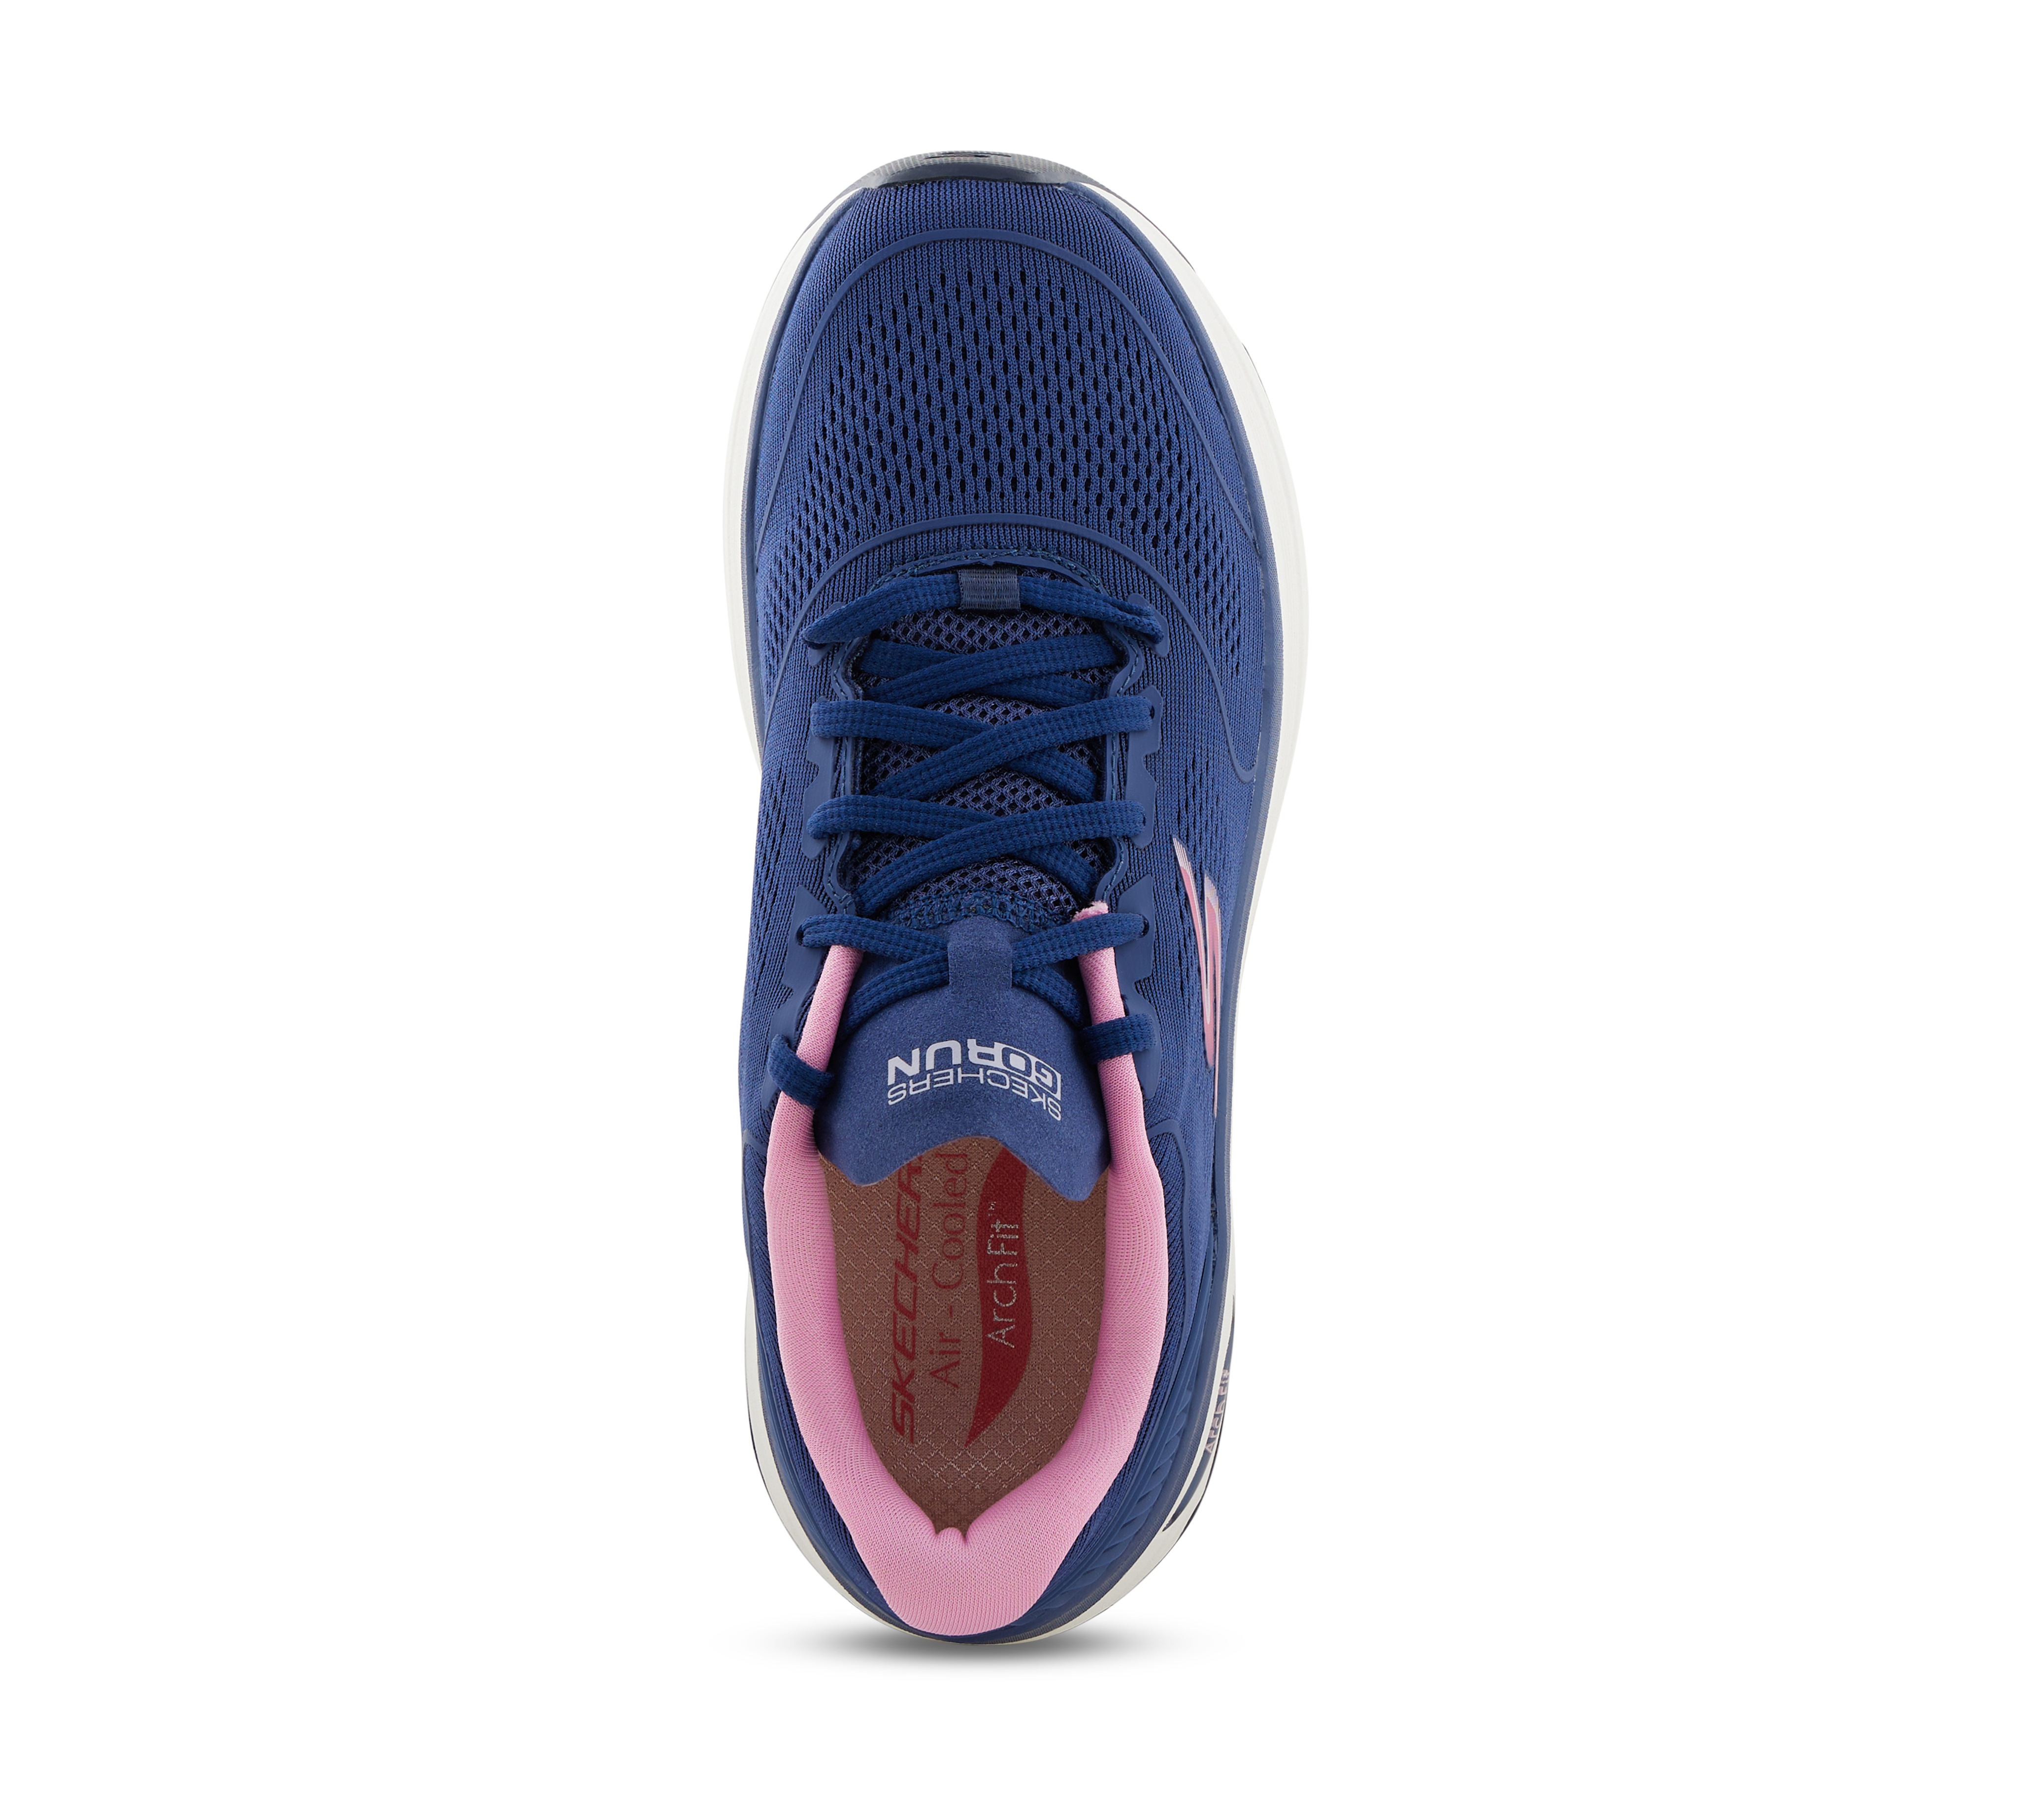 MAX CUSHIONING ARCH FIT - SWI, NAVY/PINK Footwear Top View